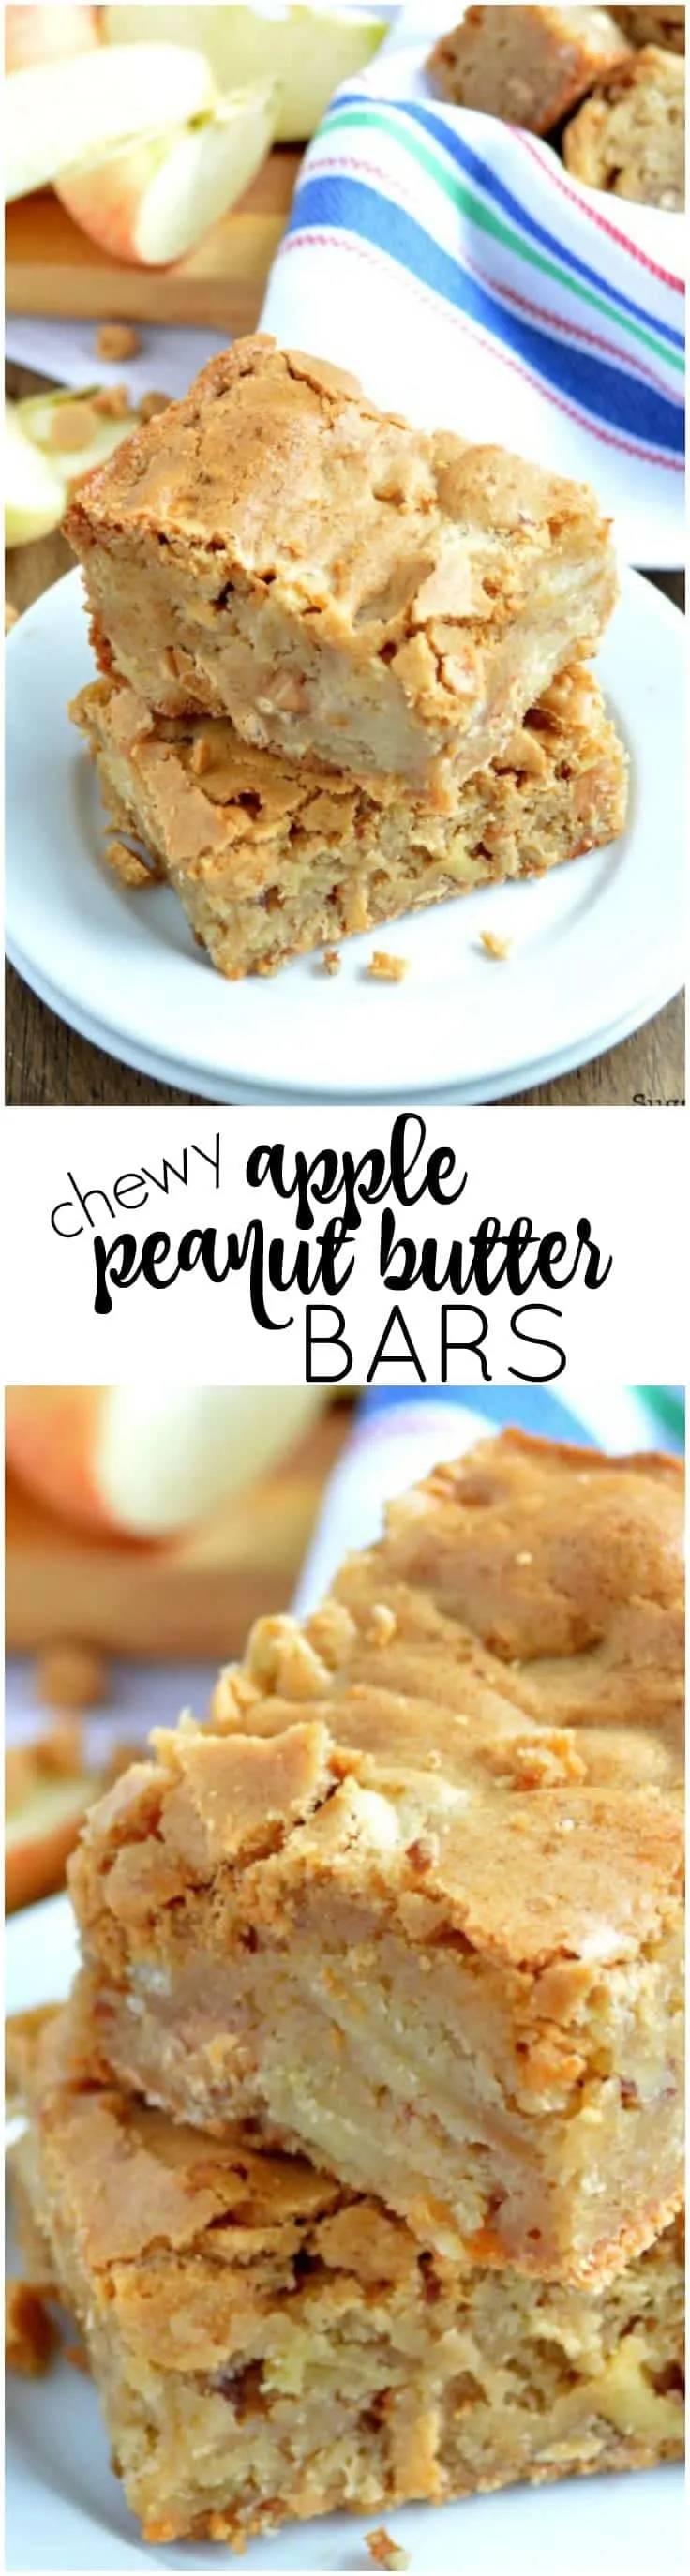 These Chewy Apple Peanut Butter Bars are simple to make and are loaded with cookie bar goodness. A favorite recipe no matter the time of year!